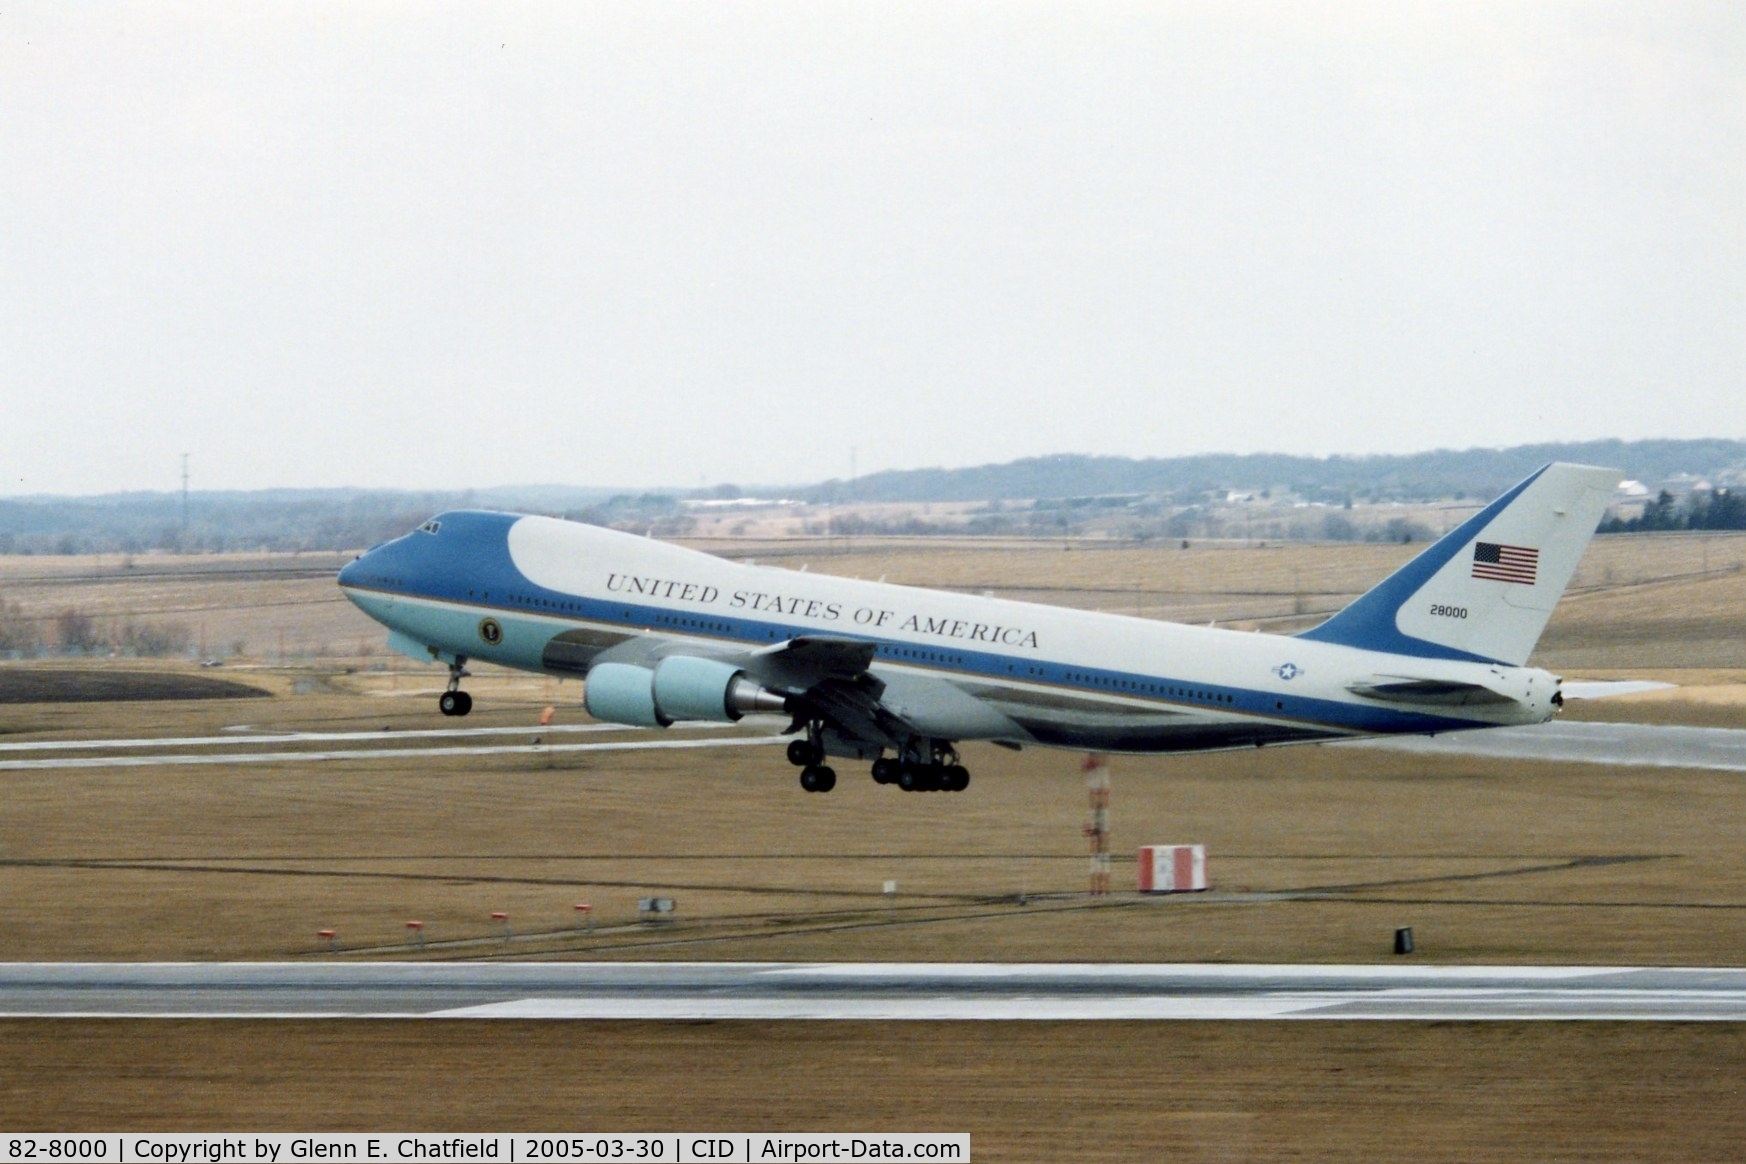 82-8000, 1987 Boeing VC-25A (747-2G4B) C/N 23824, Air Force One taking off runway 9